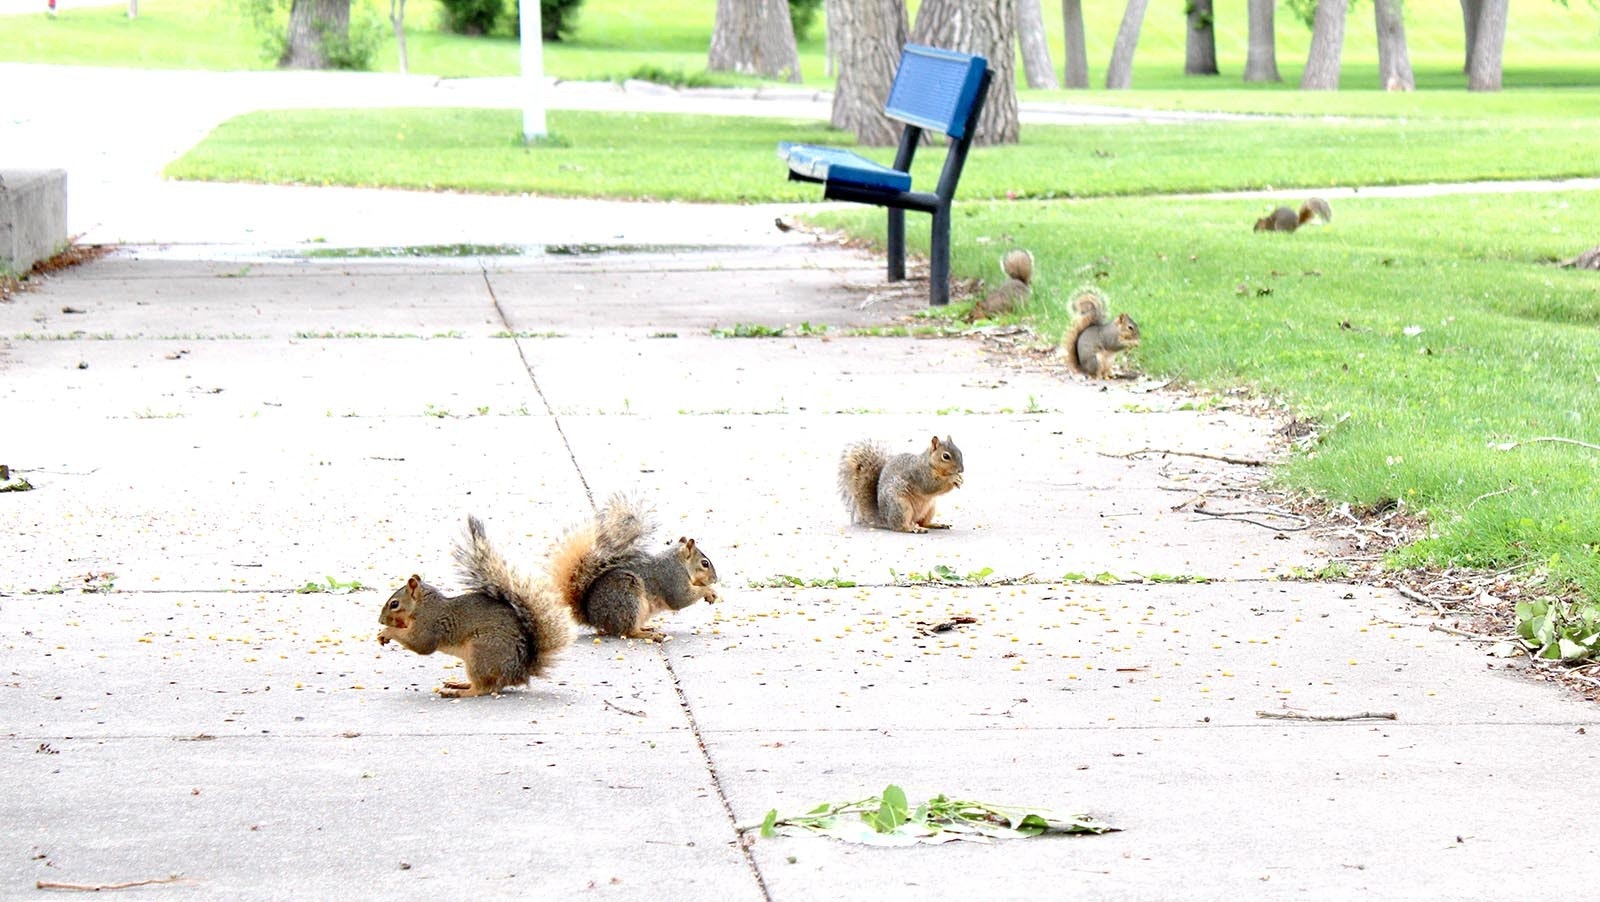 Squirrels in Holiday Park in Cheyenne have a snack Friday morning.